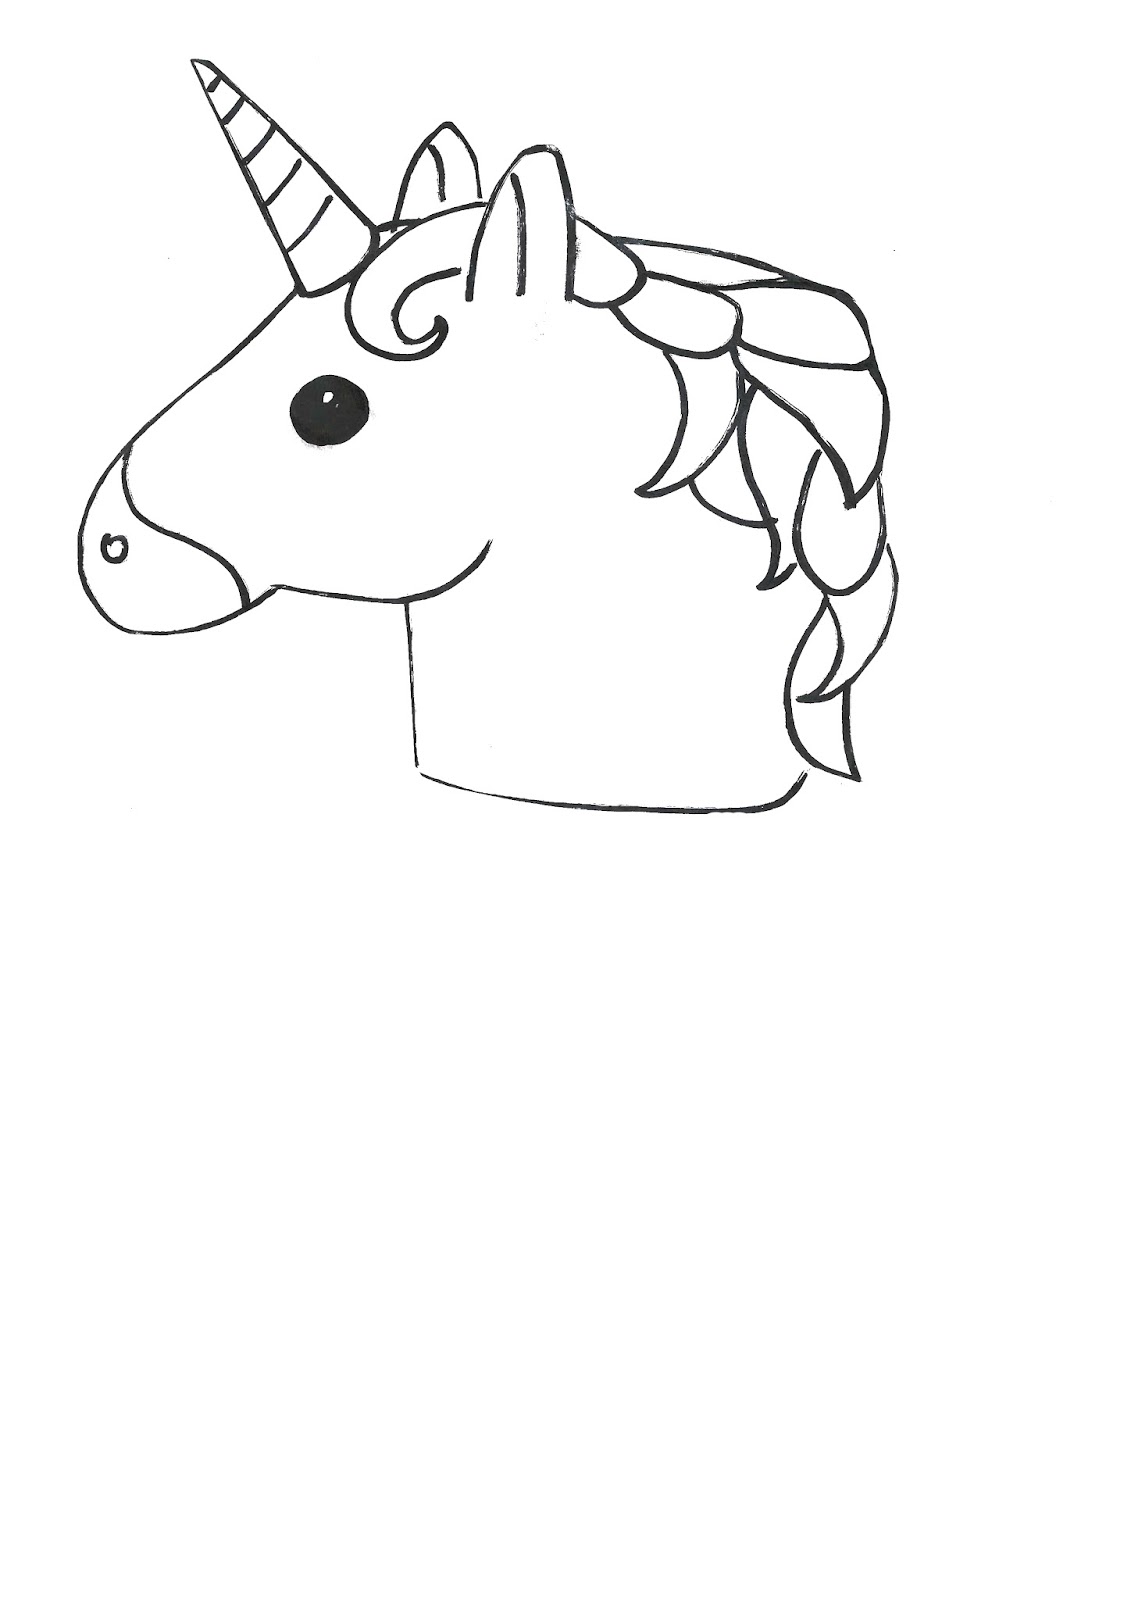 Unicorn Emoji Coloring Coloring Pages.